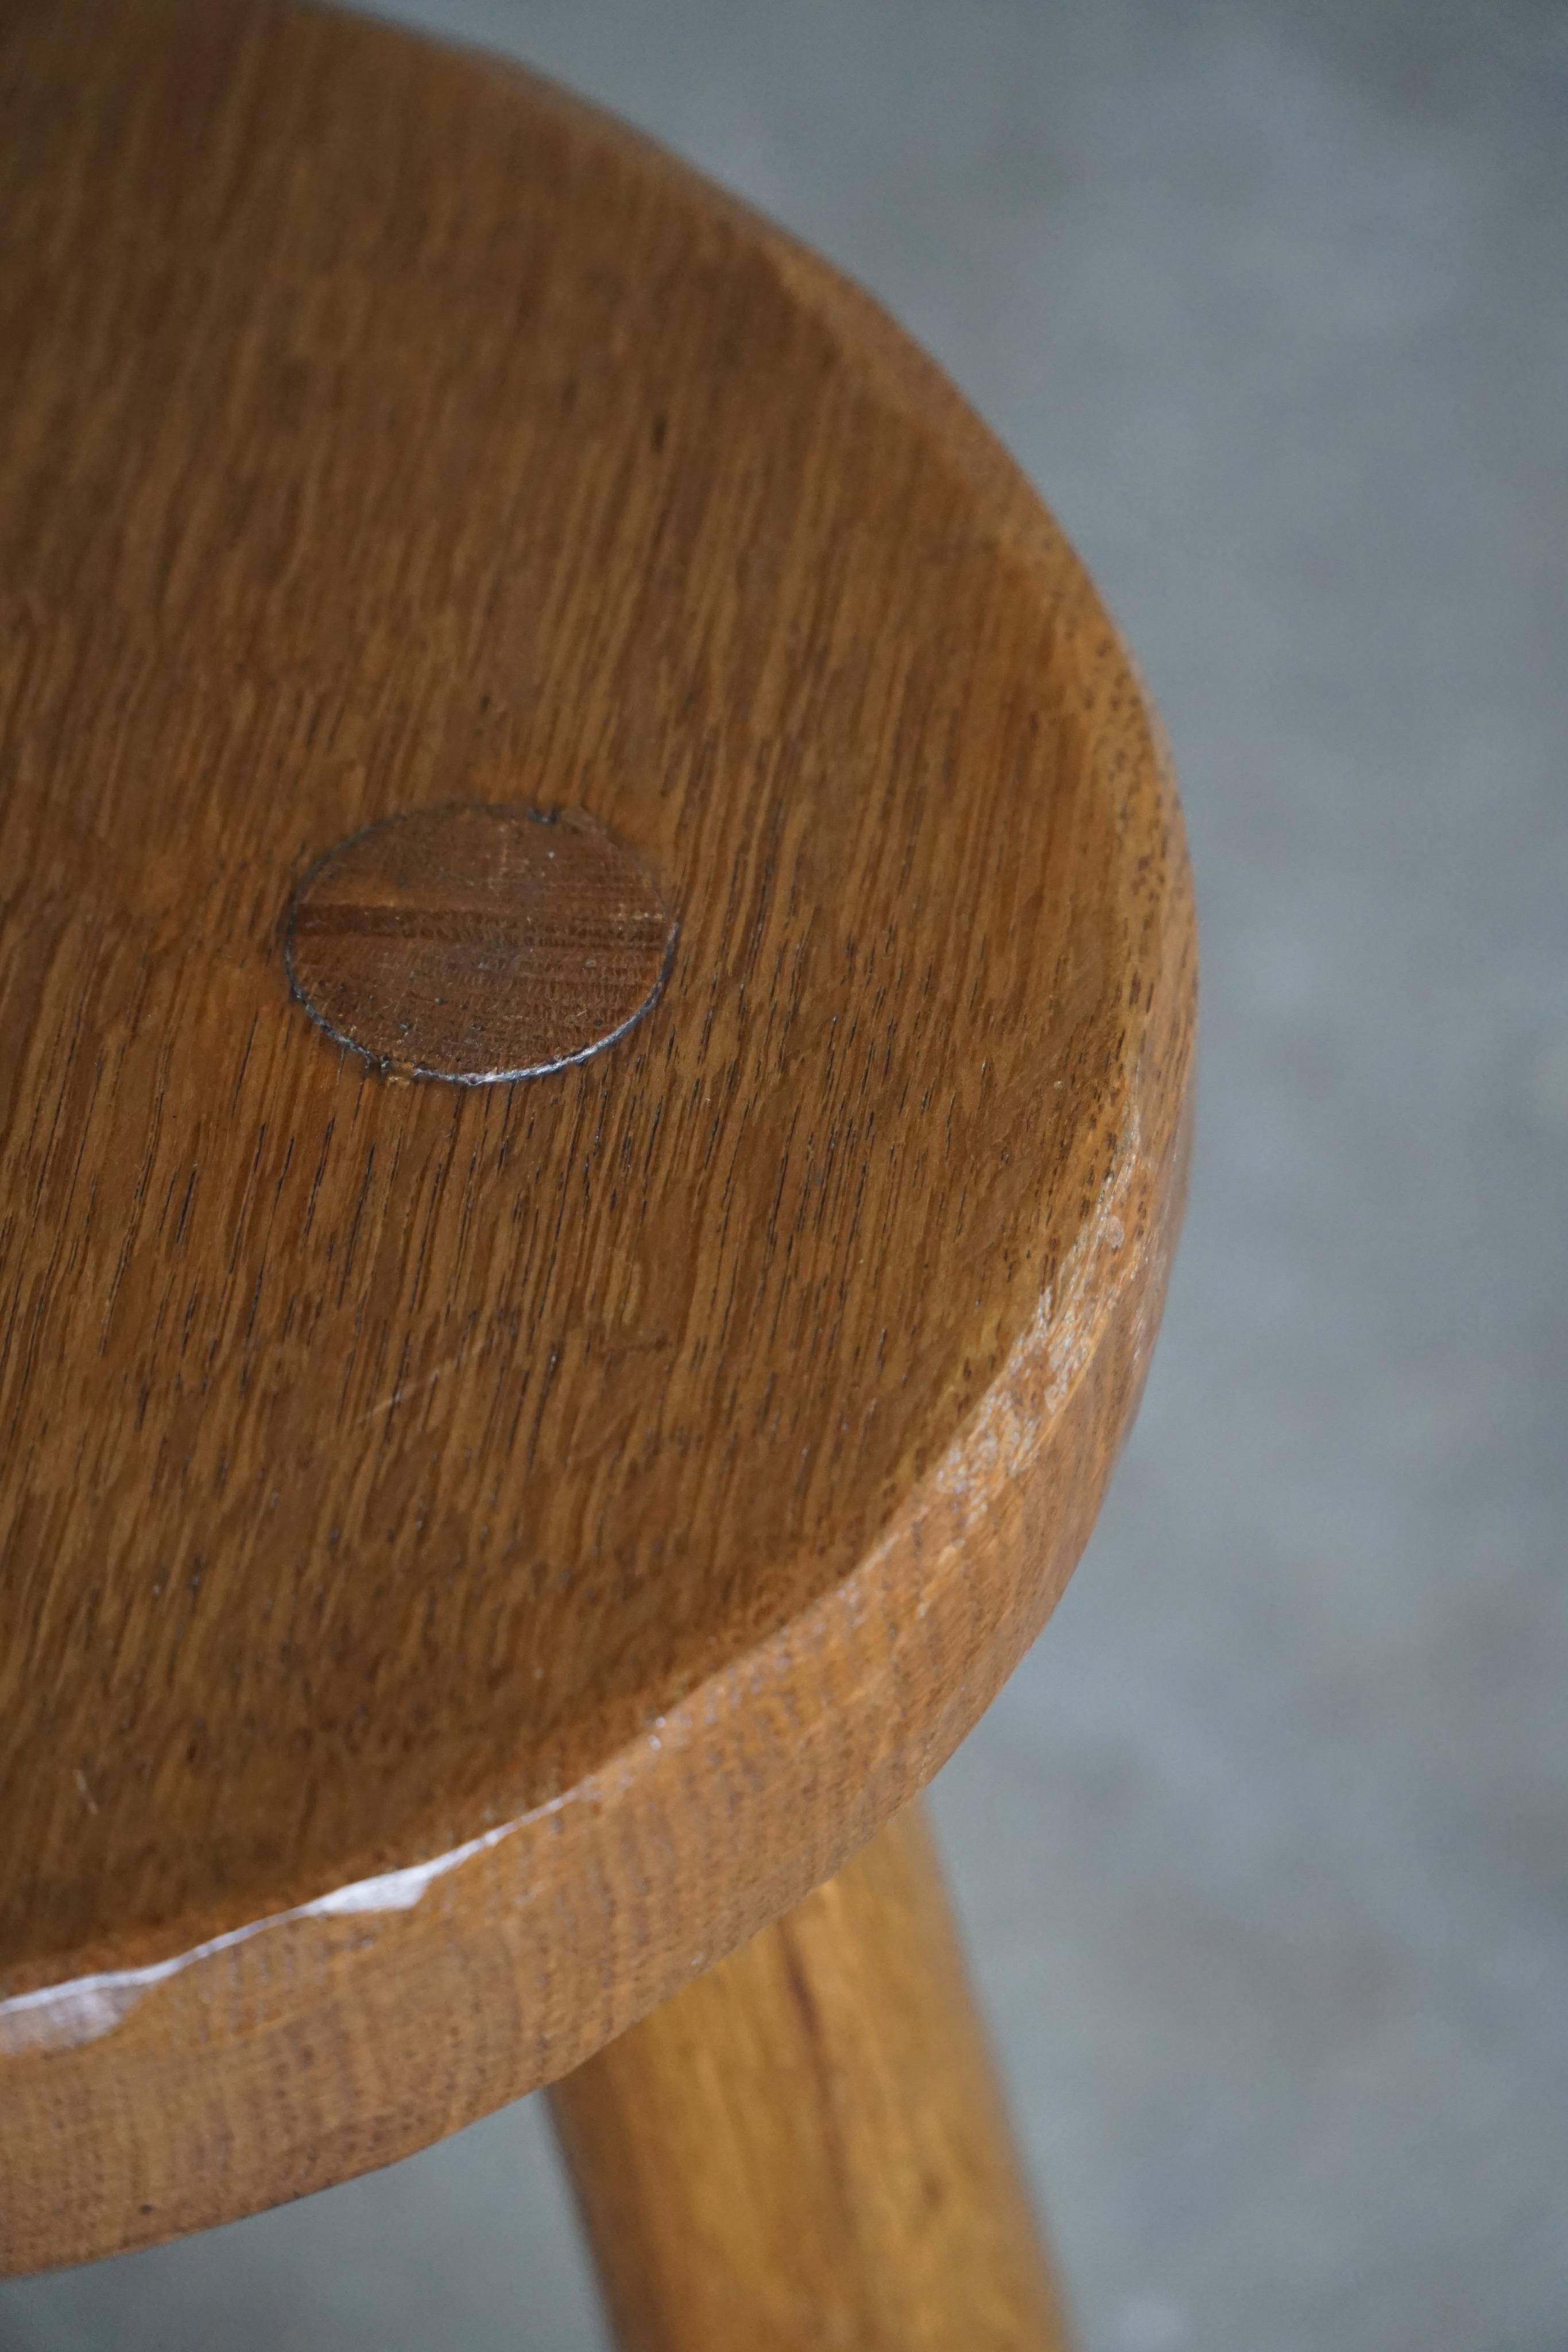 20th Century Tripod Stool in Solid Oak, by a Swedish Cabinetmaker, Midcentury, circa 1960s